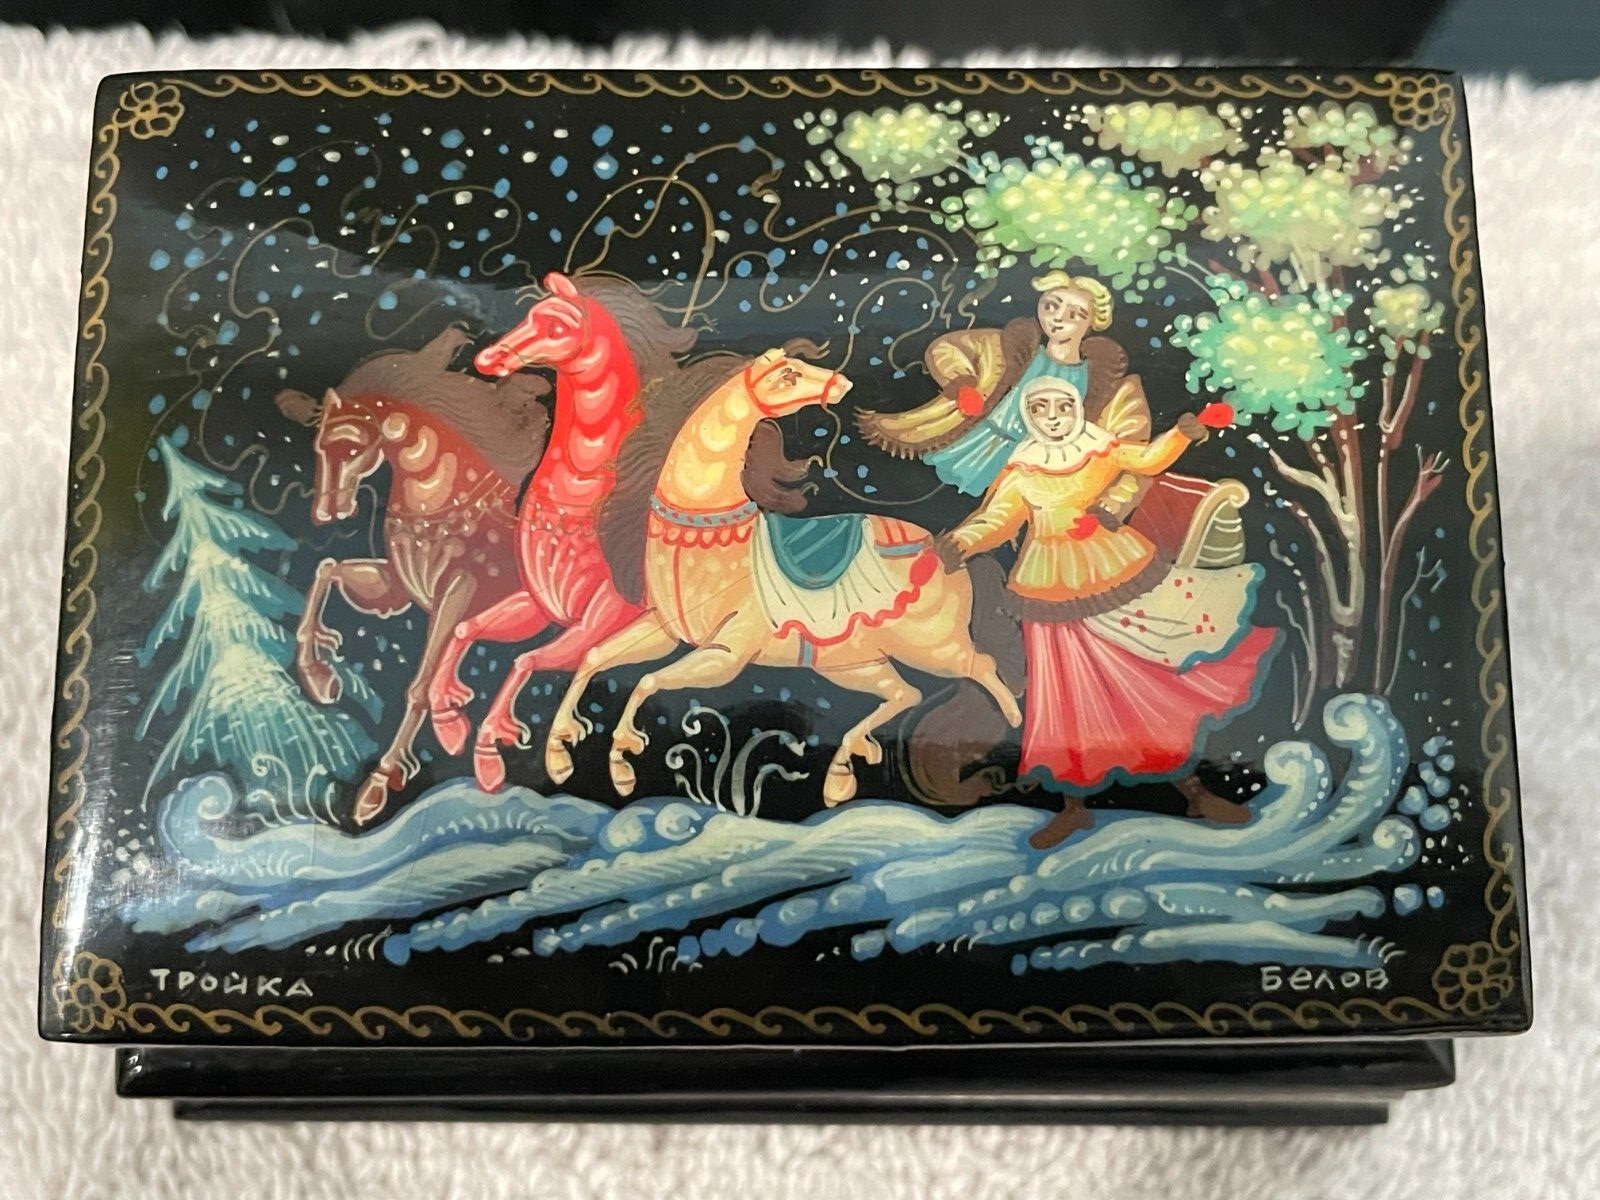 RARE VINTAGE 2 COMPARTMENT RUSSIAN LACQUER BOX FAIRY TALE HAND PAINTED SIGNED